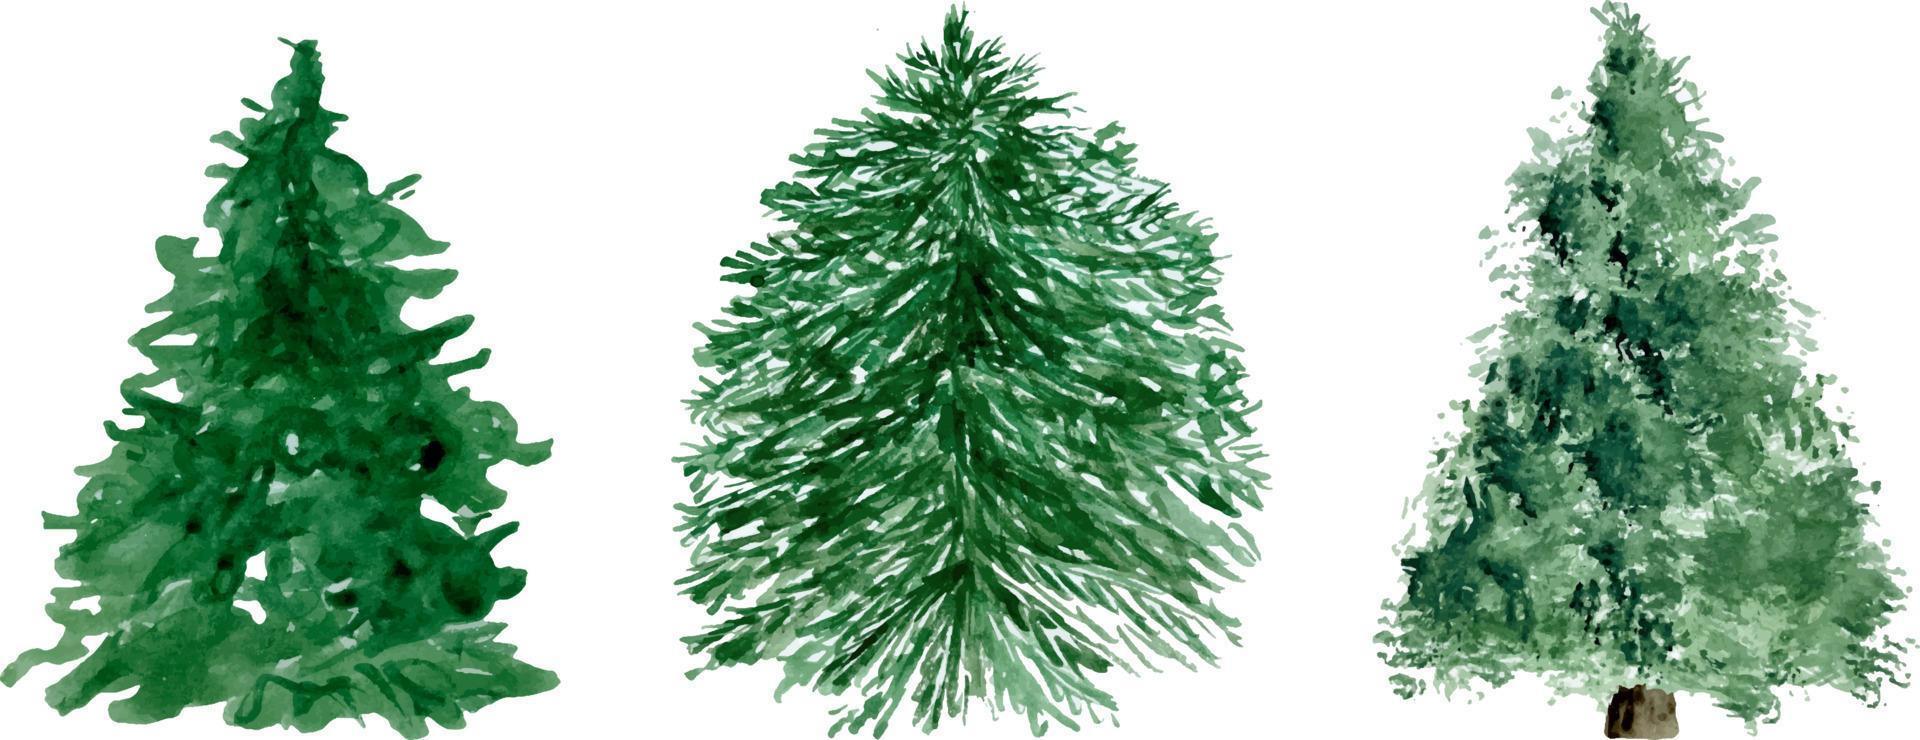 Watercolor set of green conifer trees isolated on white vector